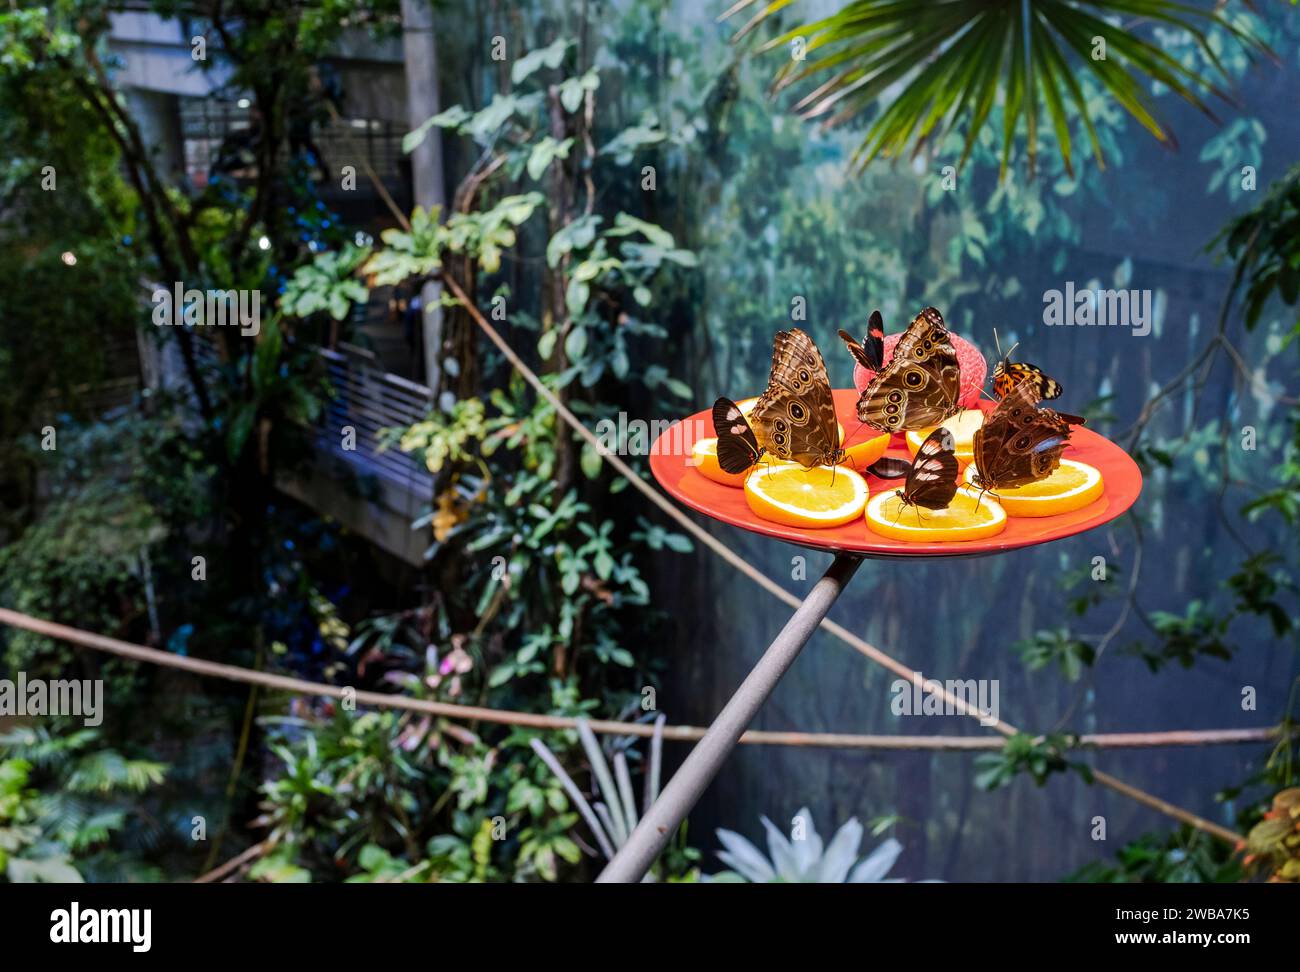 Butterflies feed on orange slices in the jungle canopy of the rainforest exhibit at the California Academy of Sciences, San Francisco Stock Photo